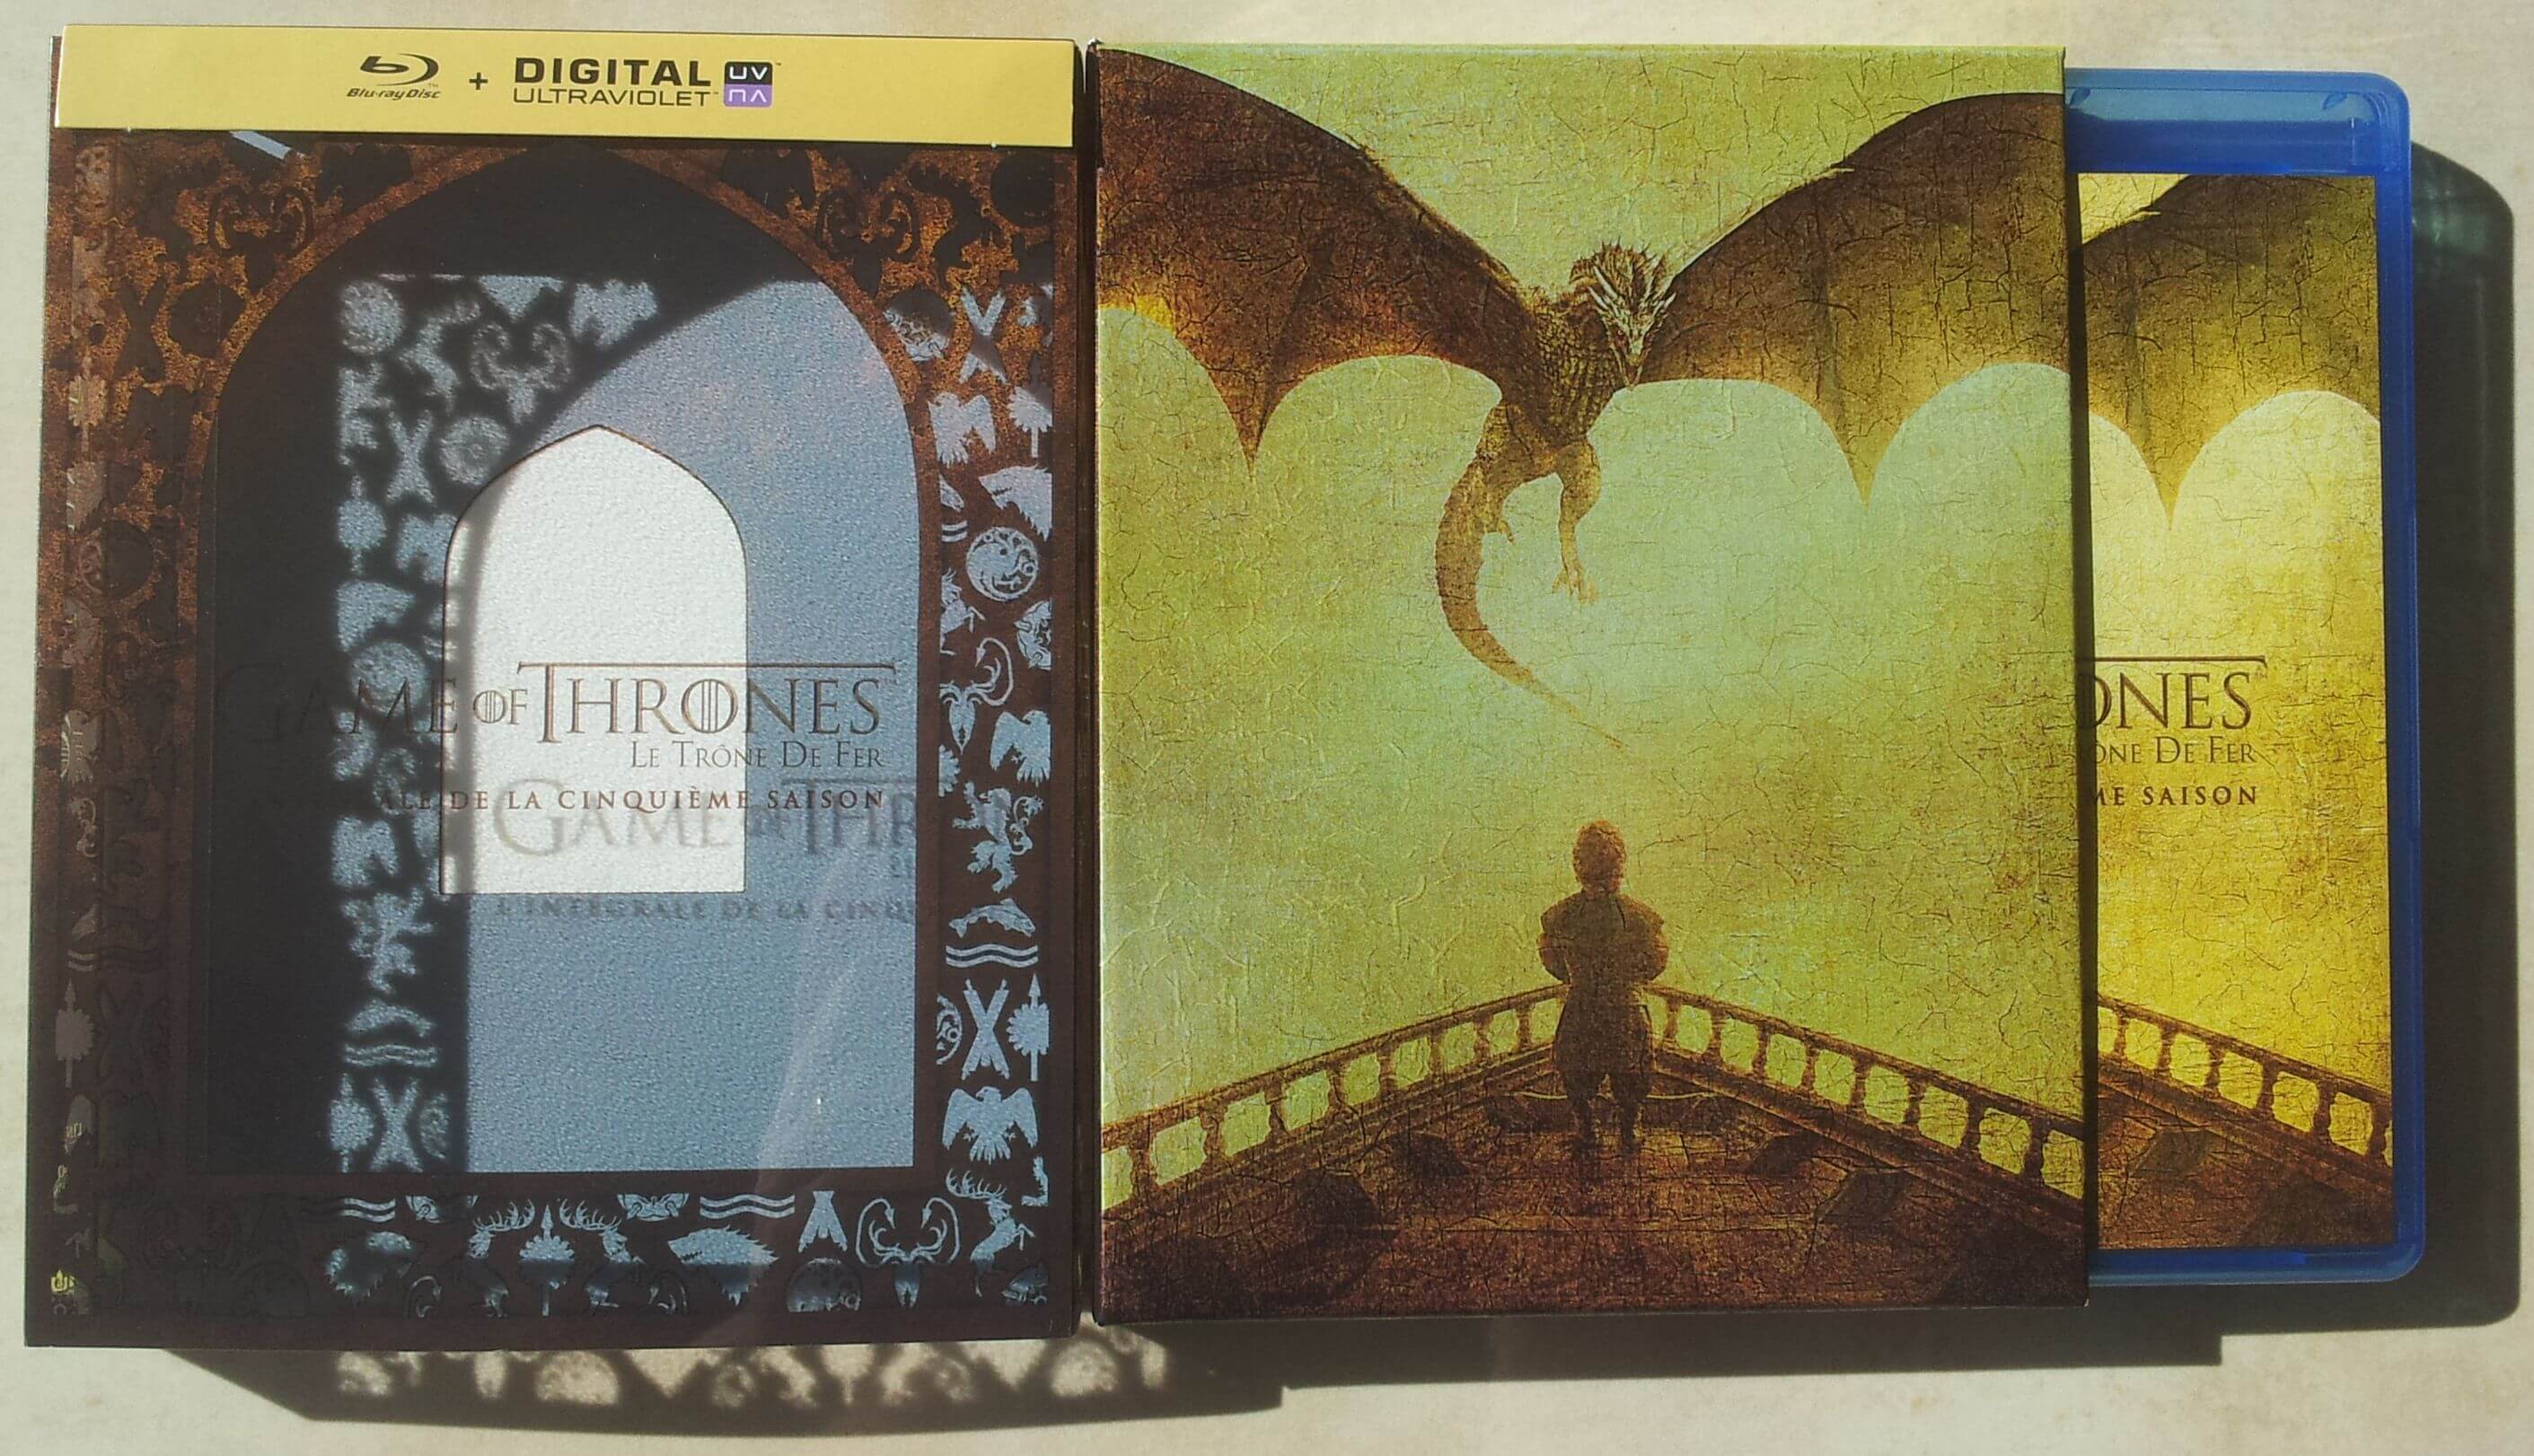 blu-ray game of thrones saison 5 packaging